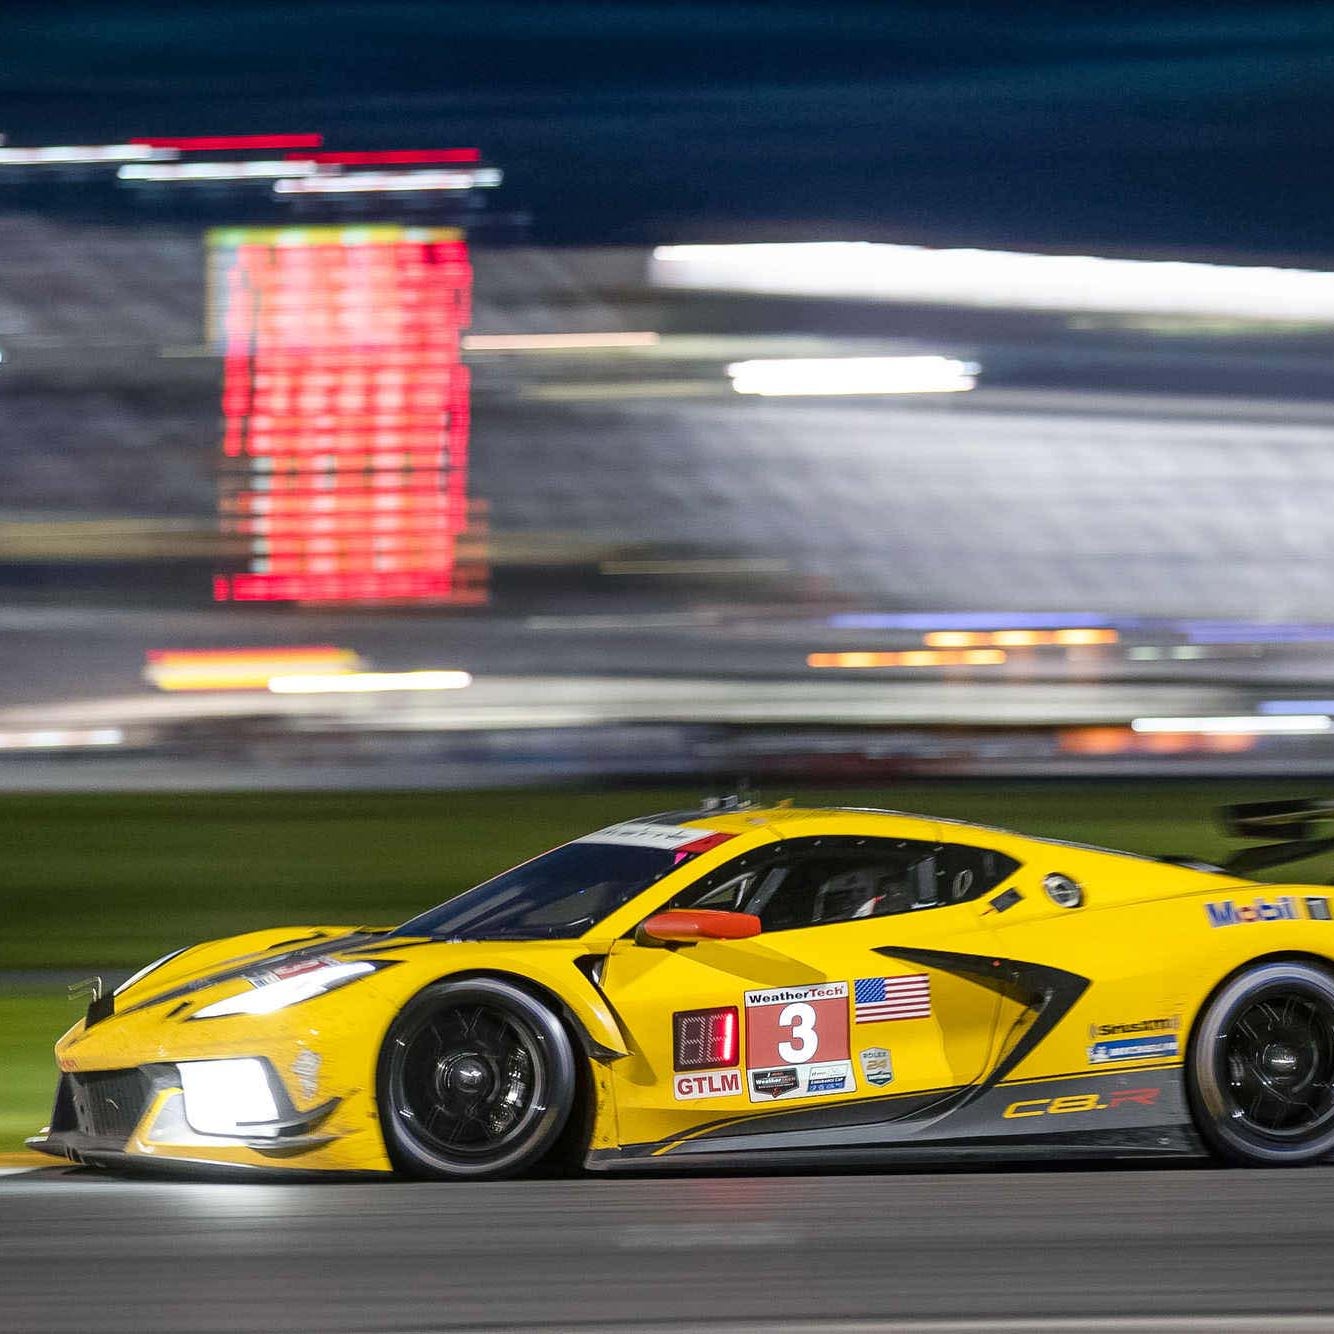 The winner. The No. 3 Chevrolet Corvette C8.R driven by Antonio Garcia and Jordan Taylor took home the mid-engine 'Vette's first victory at Daytona on July 4.